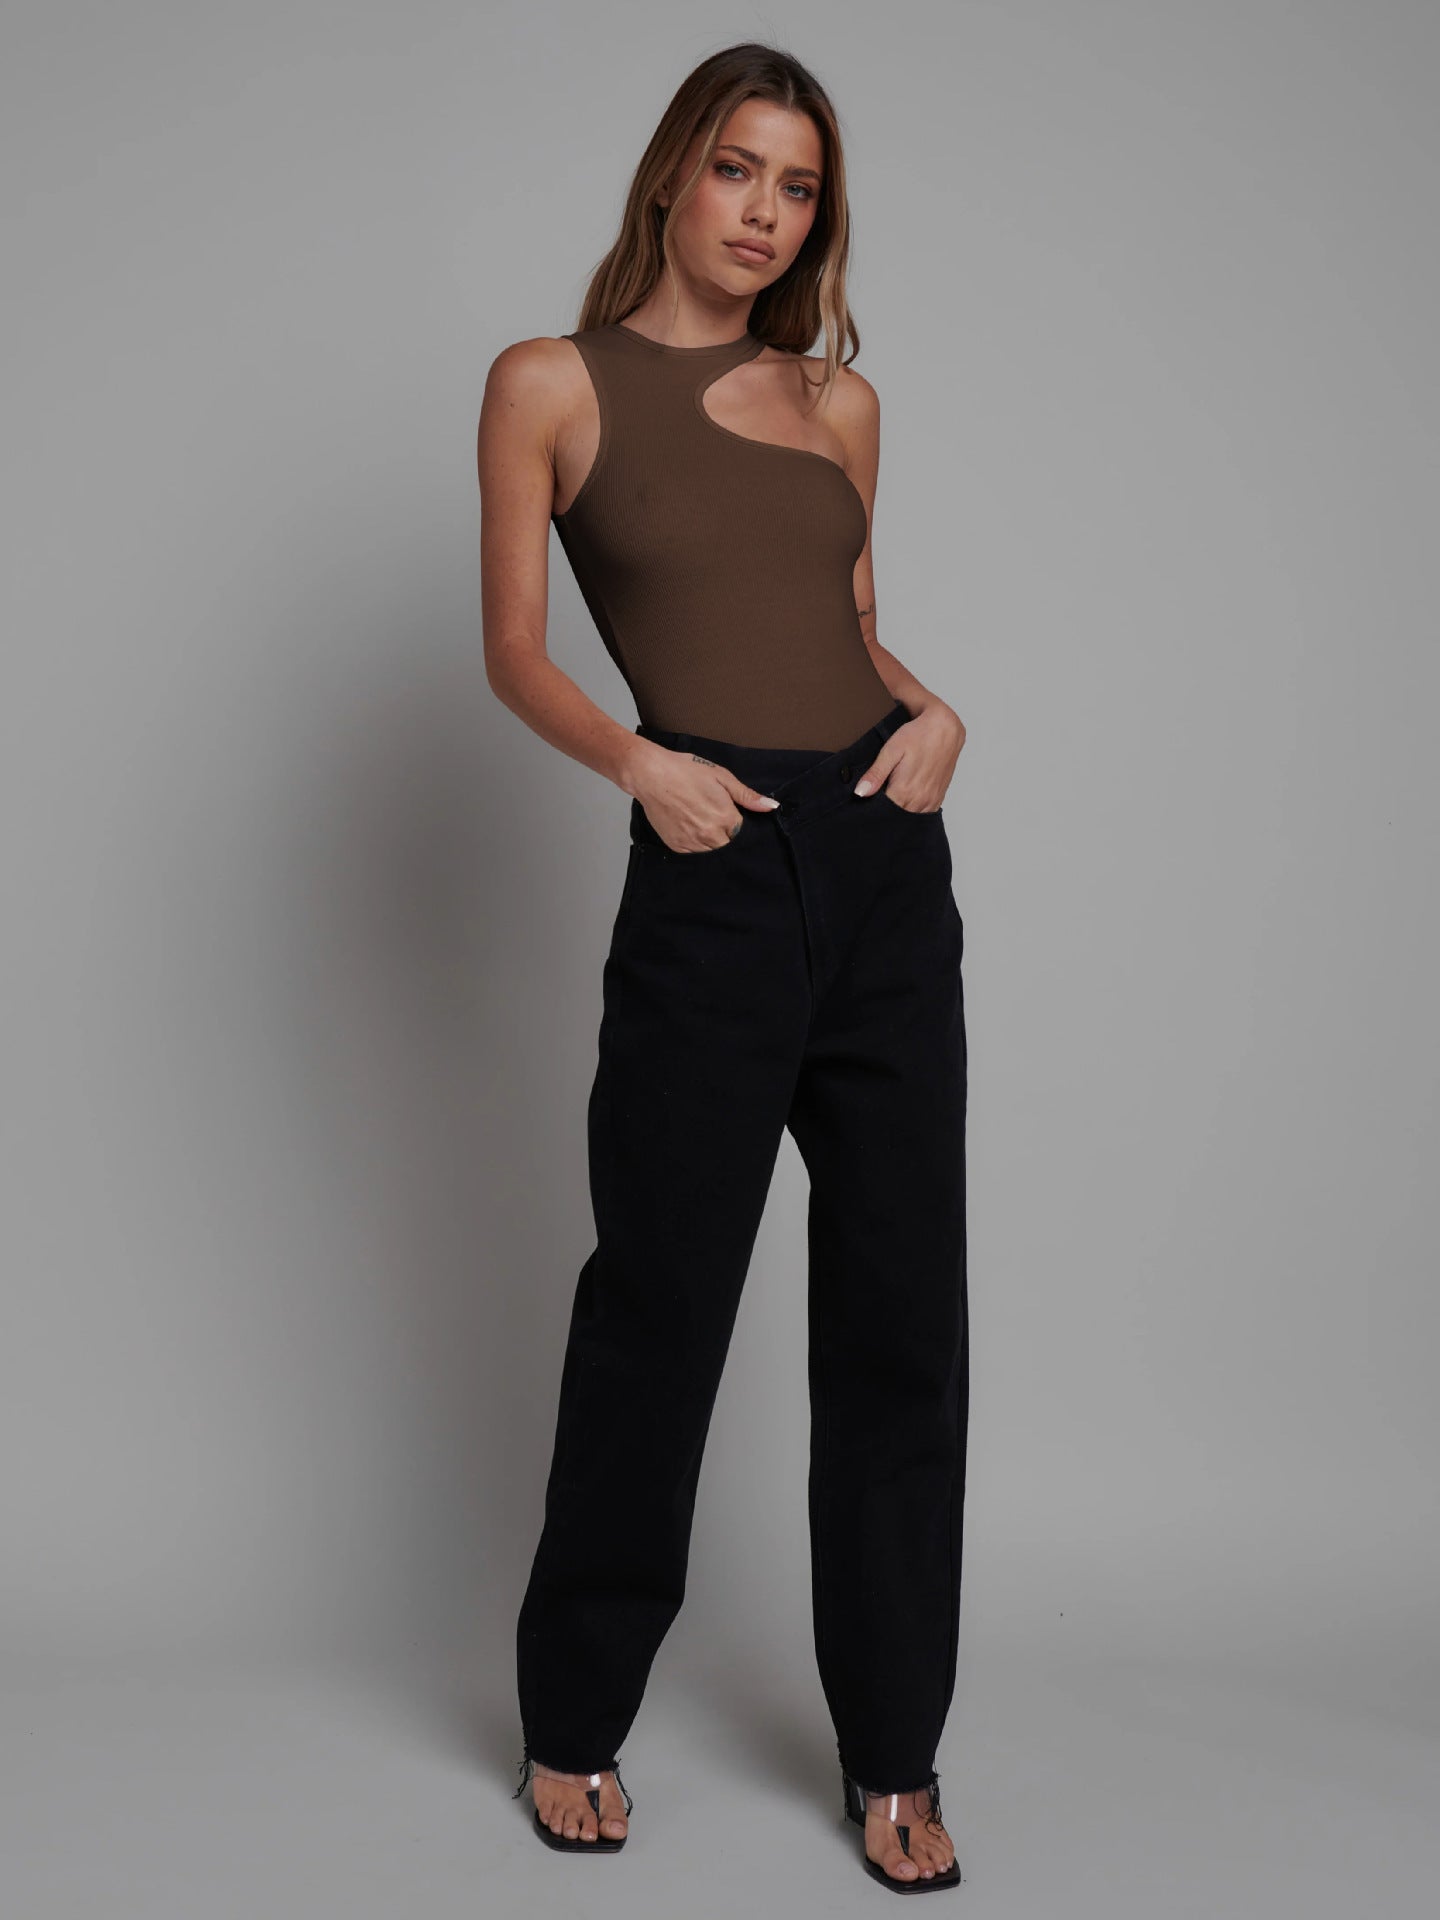 Women's Summer Sexy Ribbed Tight Sleeveless Hollow Jumpsuits